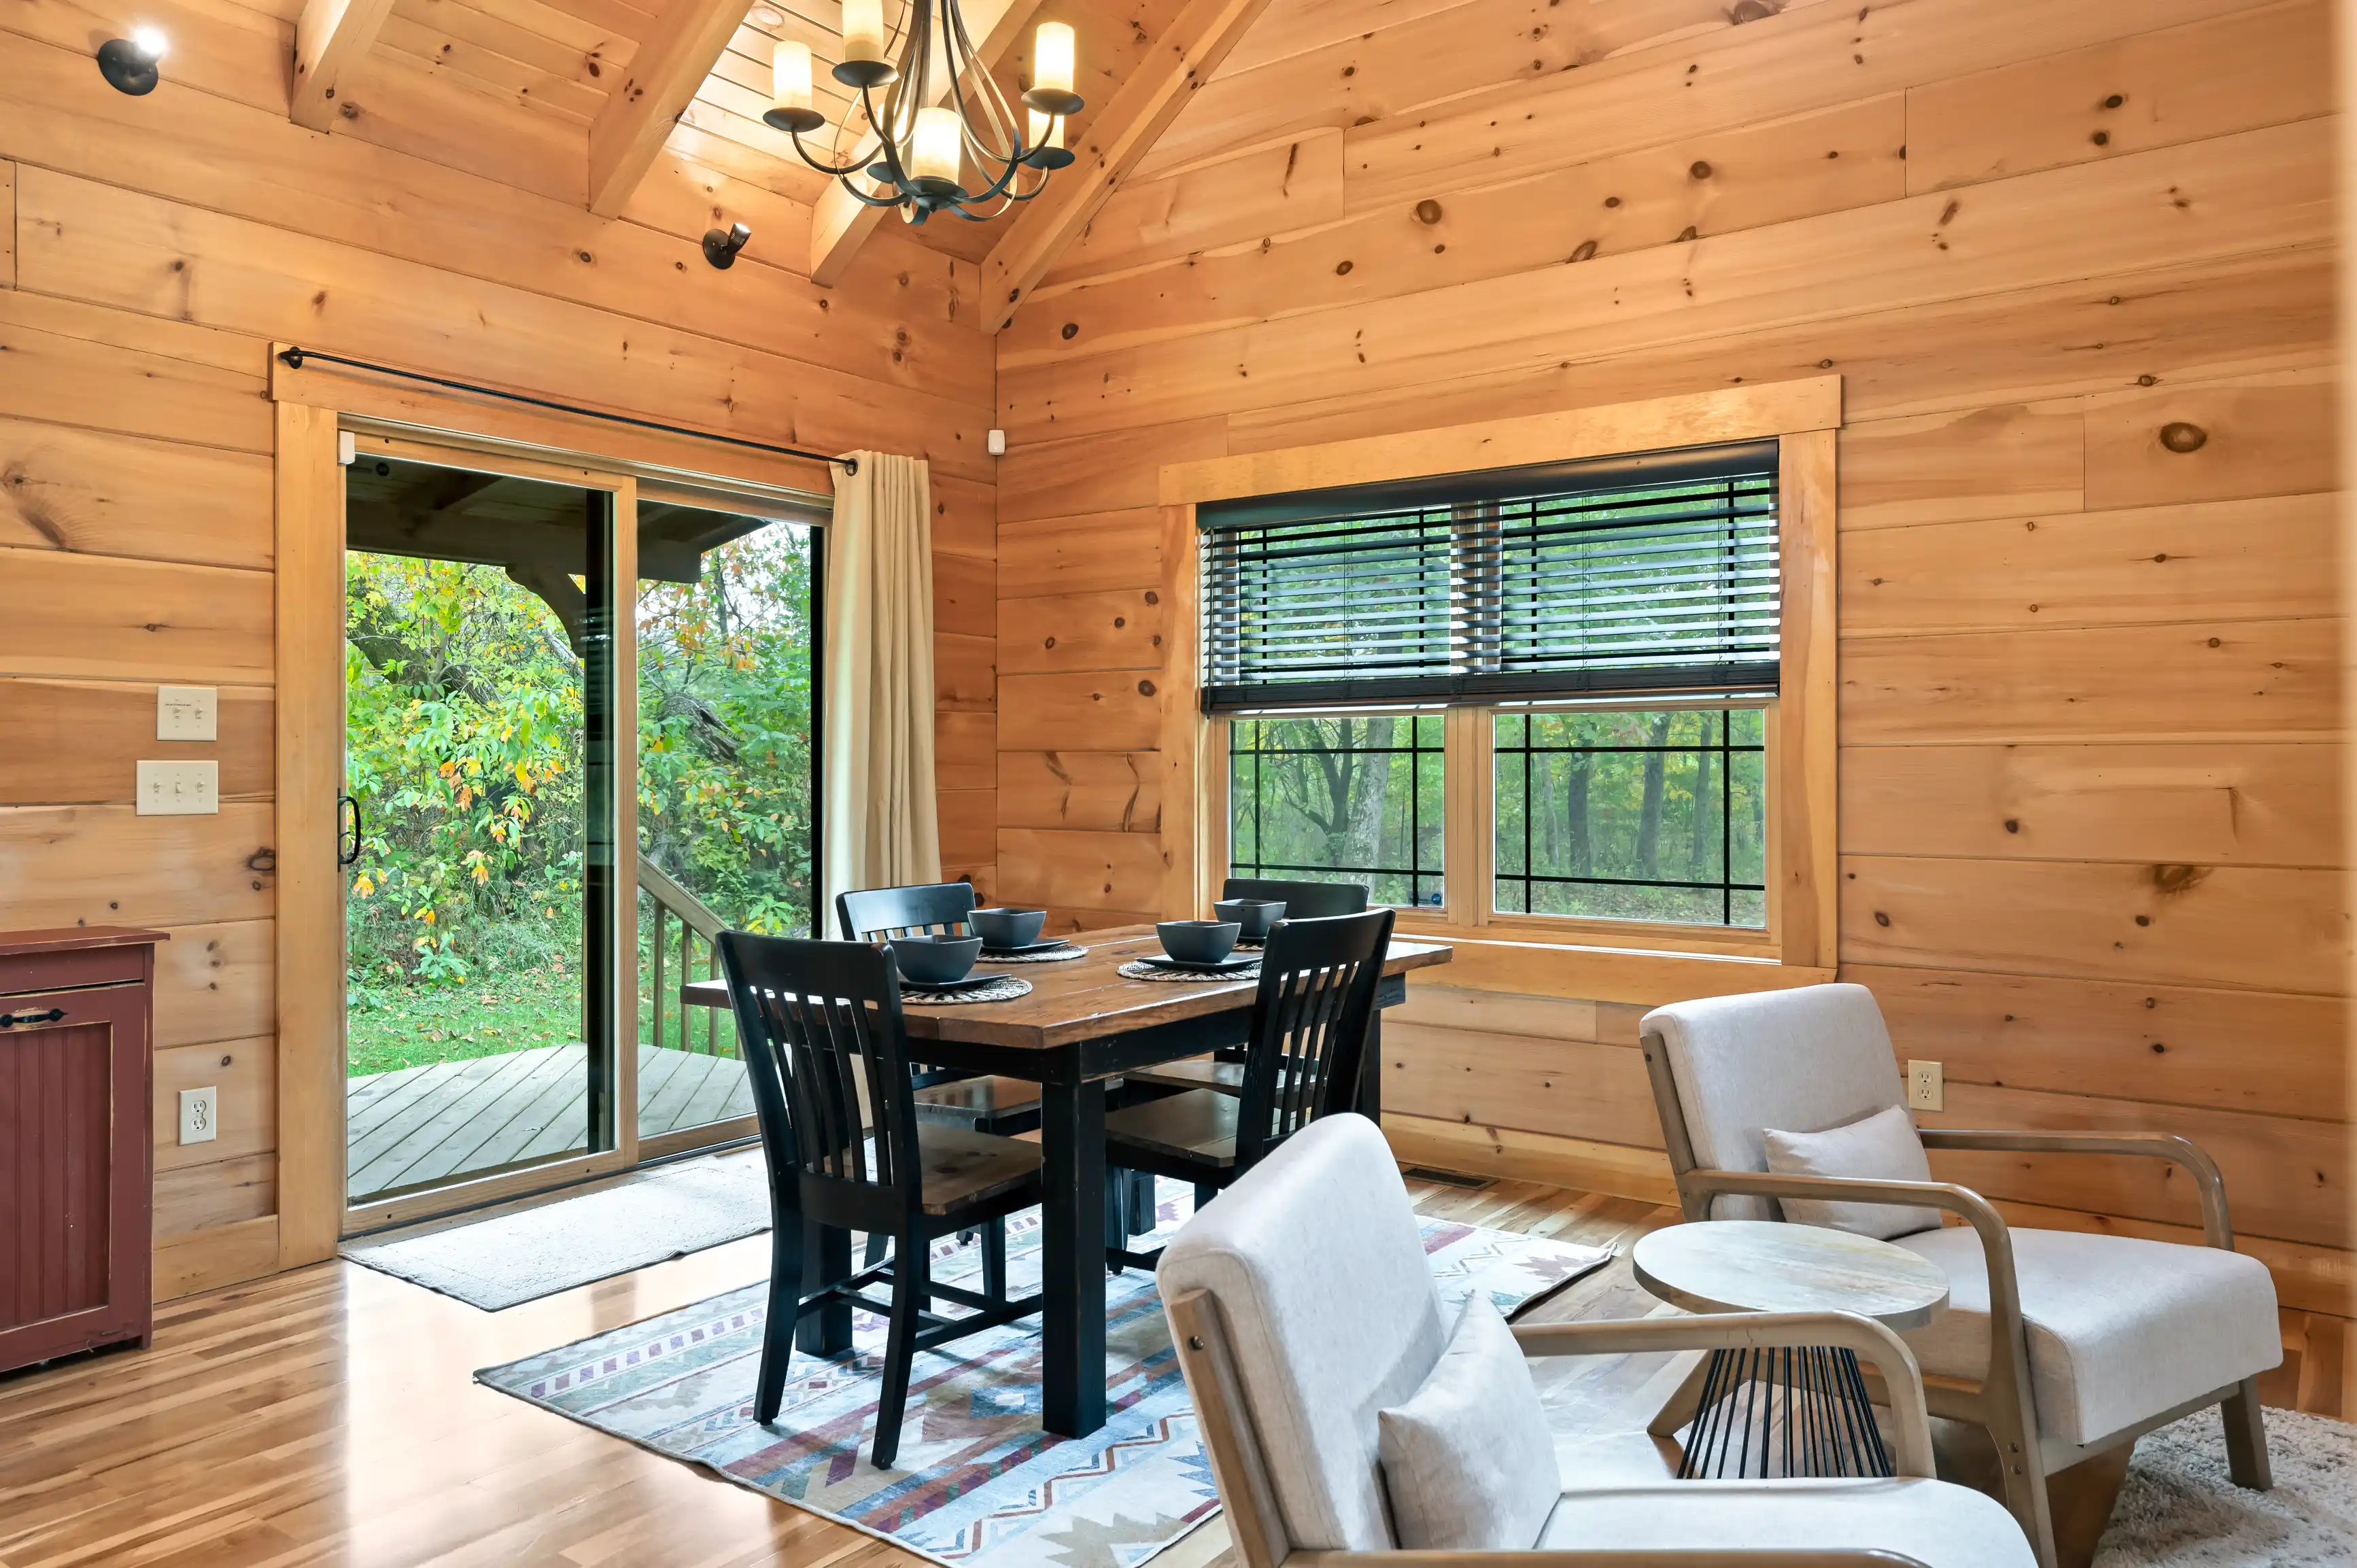 Cozy wooden cabin interior with dining table set, comfortable chairs, and a view of the woods through windows.